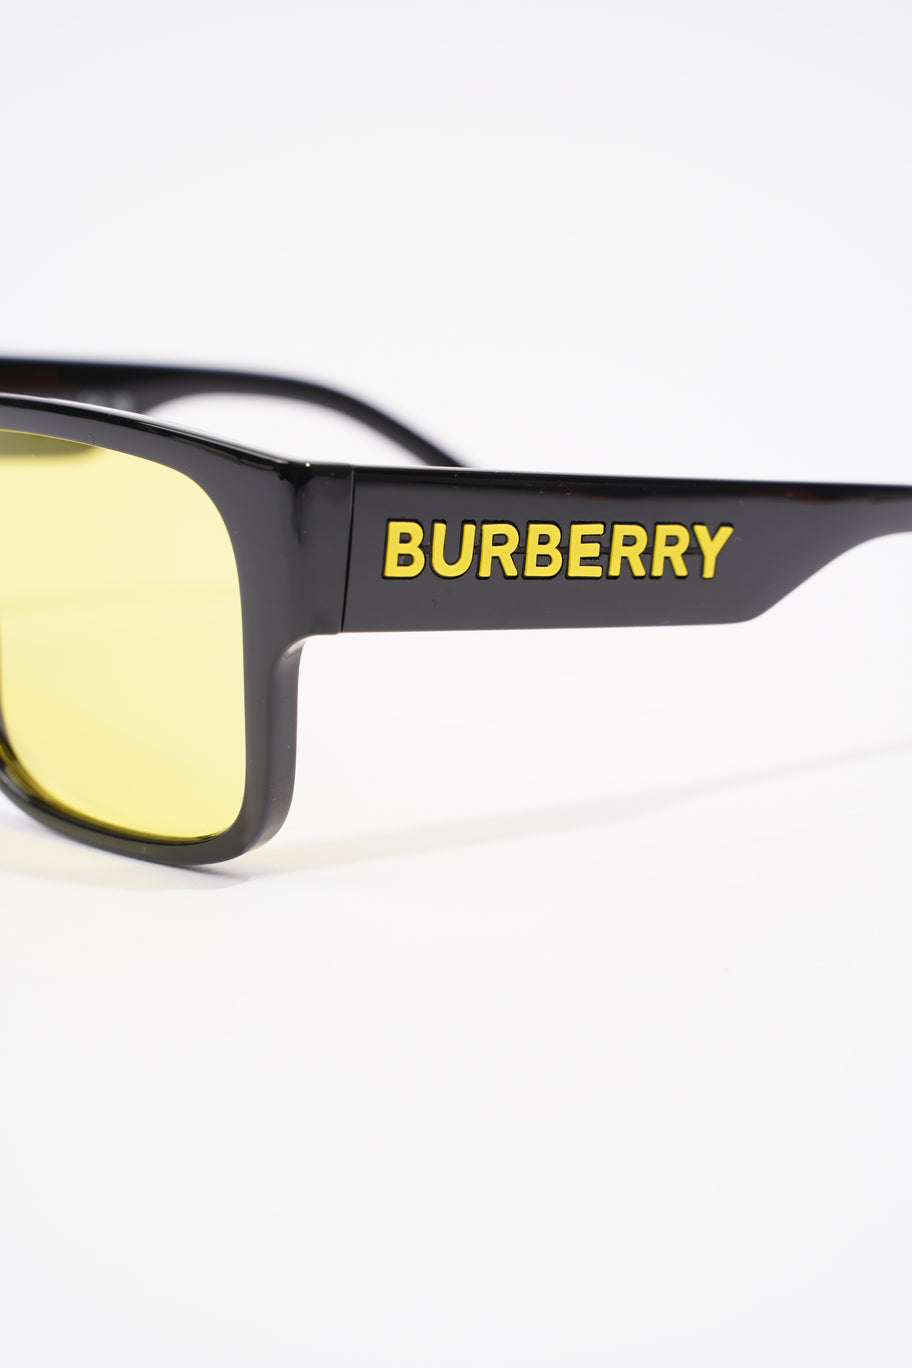 Knight Square Tinted Sunglasses Black / Yellow Acetate 145mm Image 9